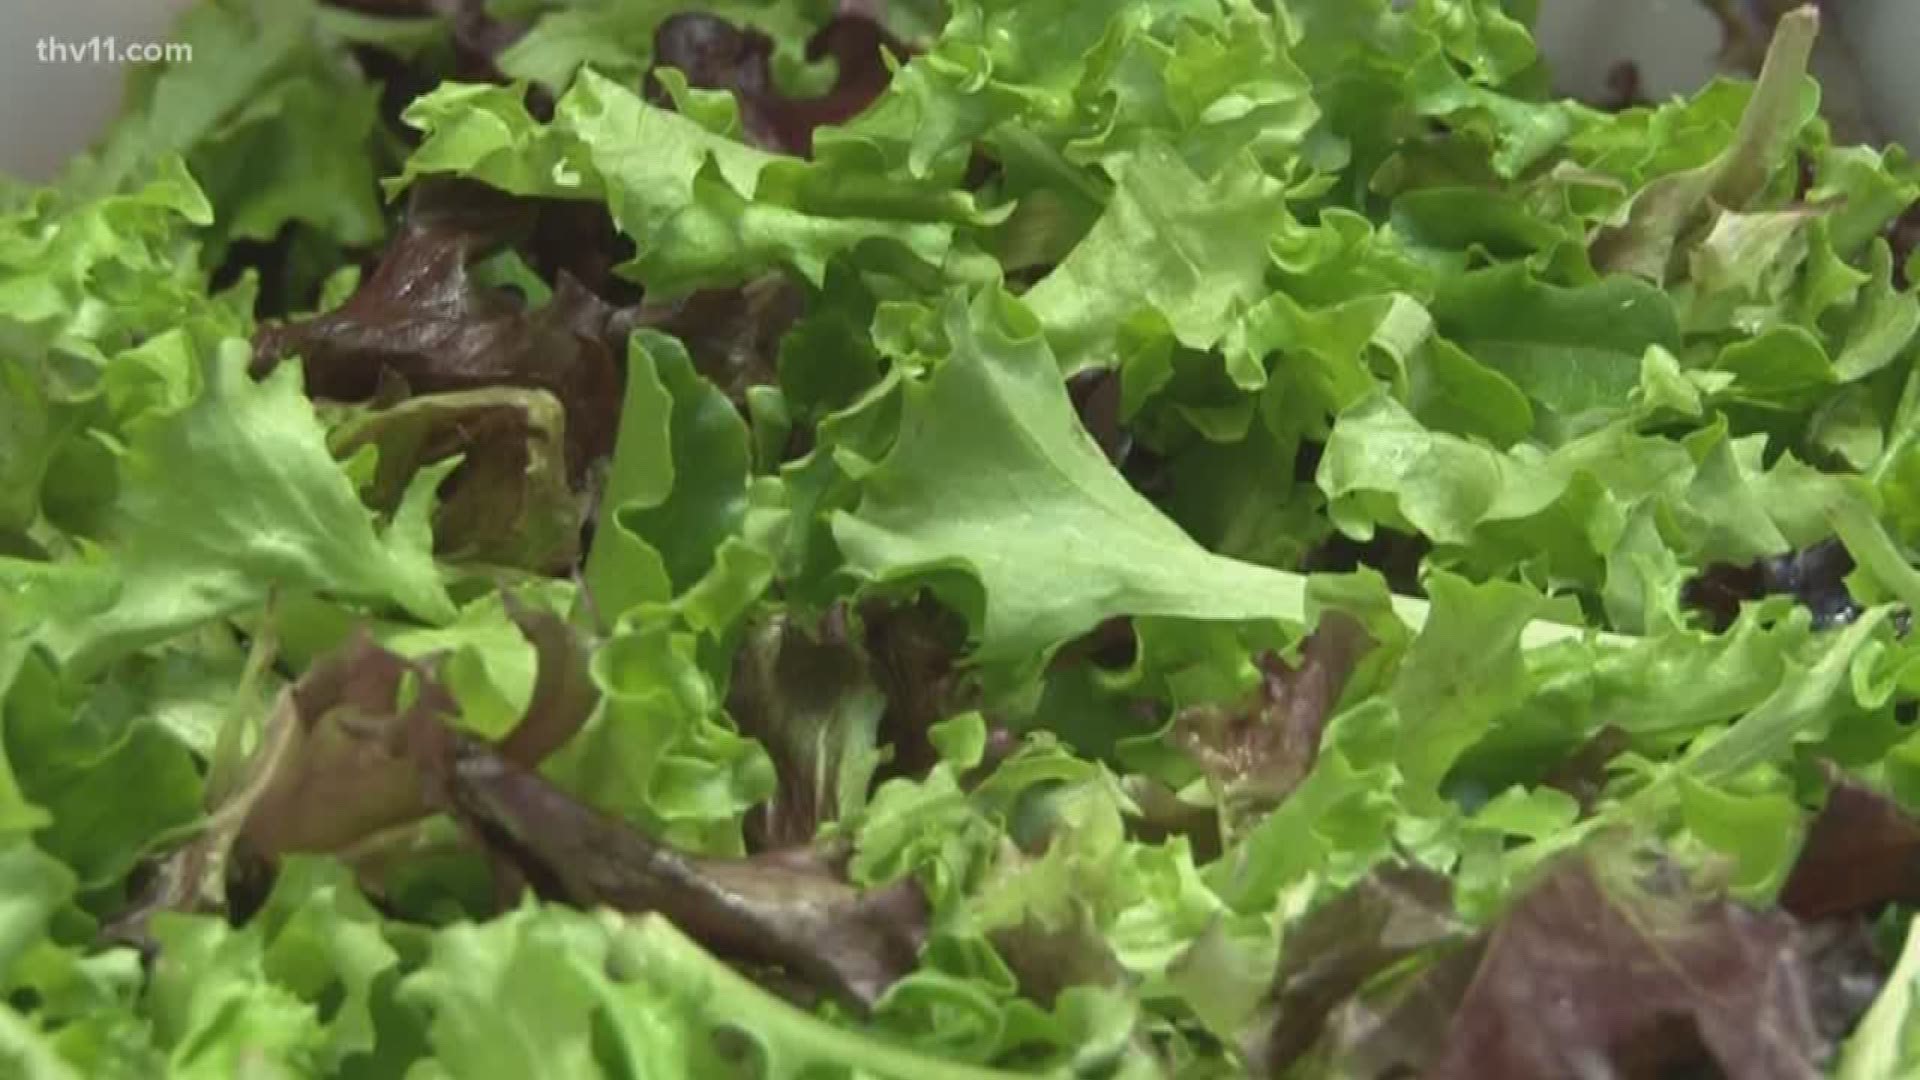 A nationwide recall on romaine lettuce due to concerns over E. Coli is causing lots of people to toss the green in the trash.